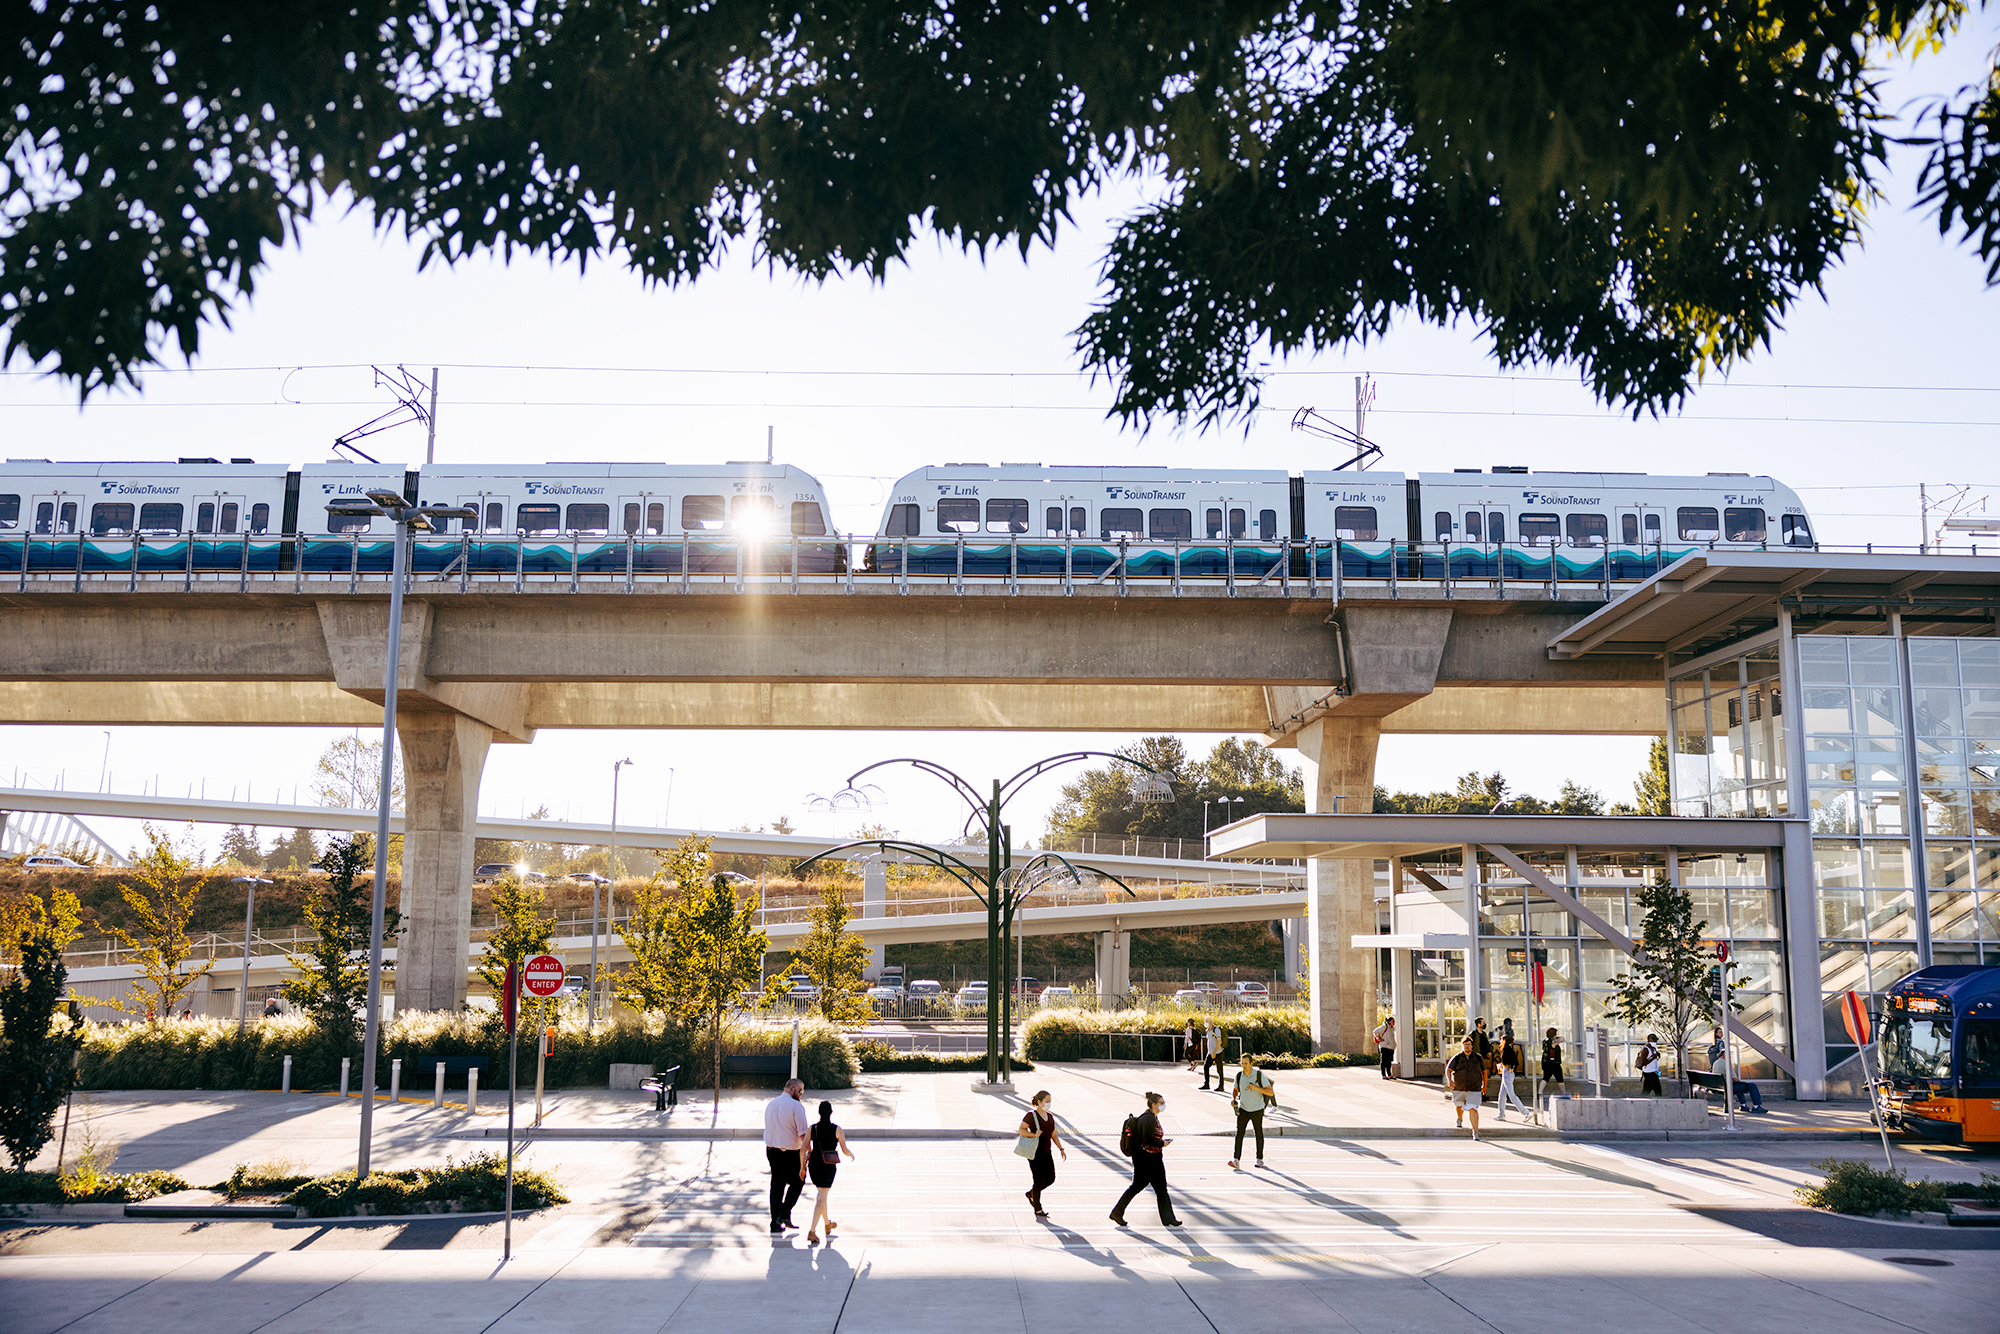 A Link light rail train approaches an elevated station as pedestrians and bus connections move about on the ground-level.